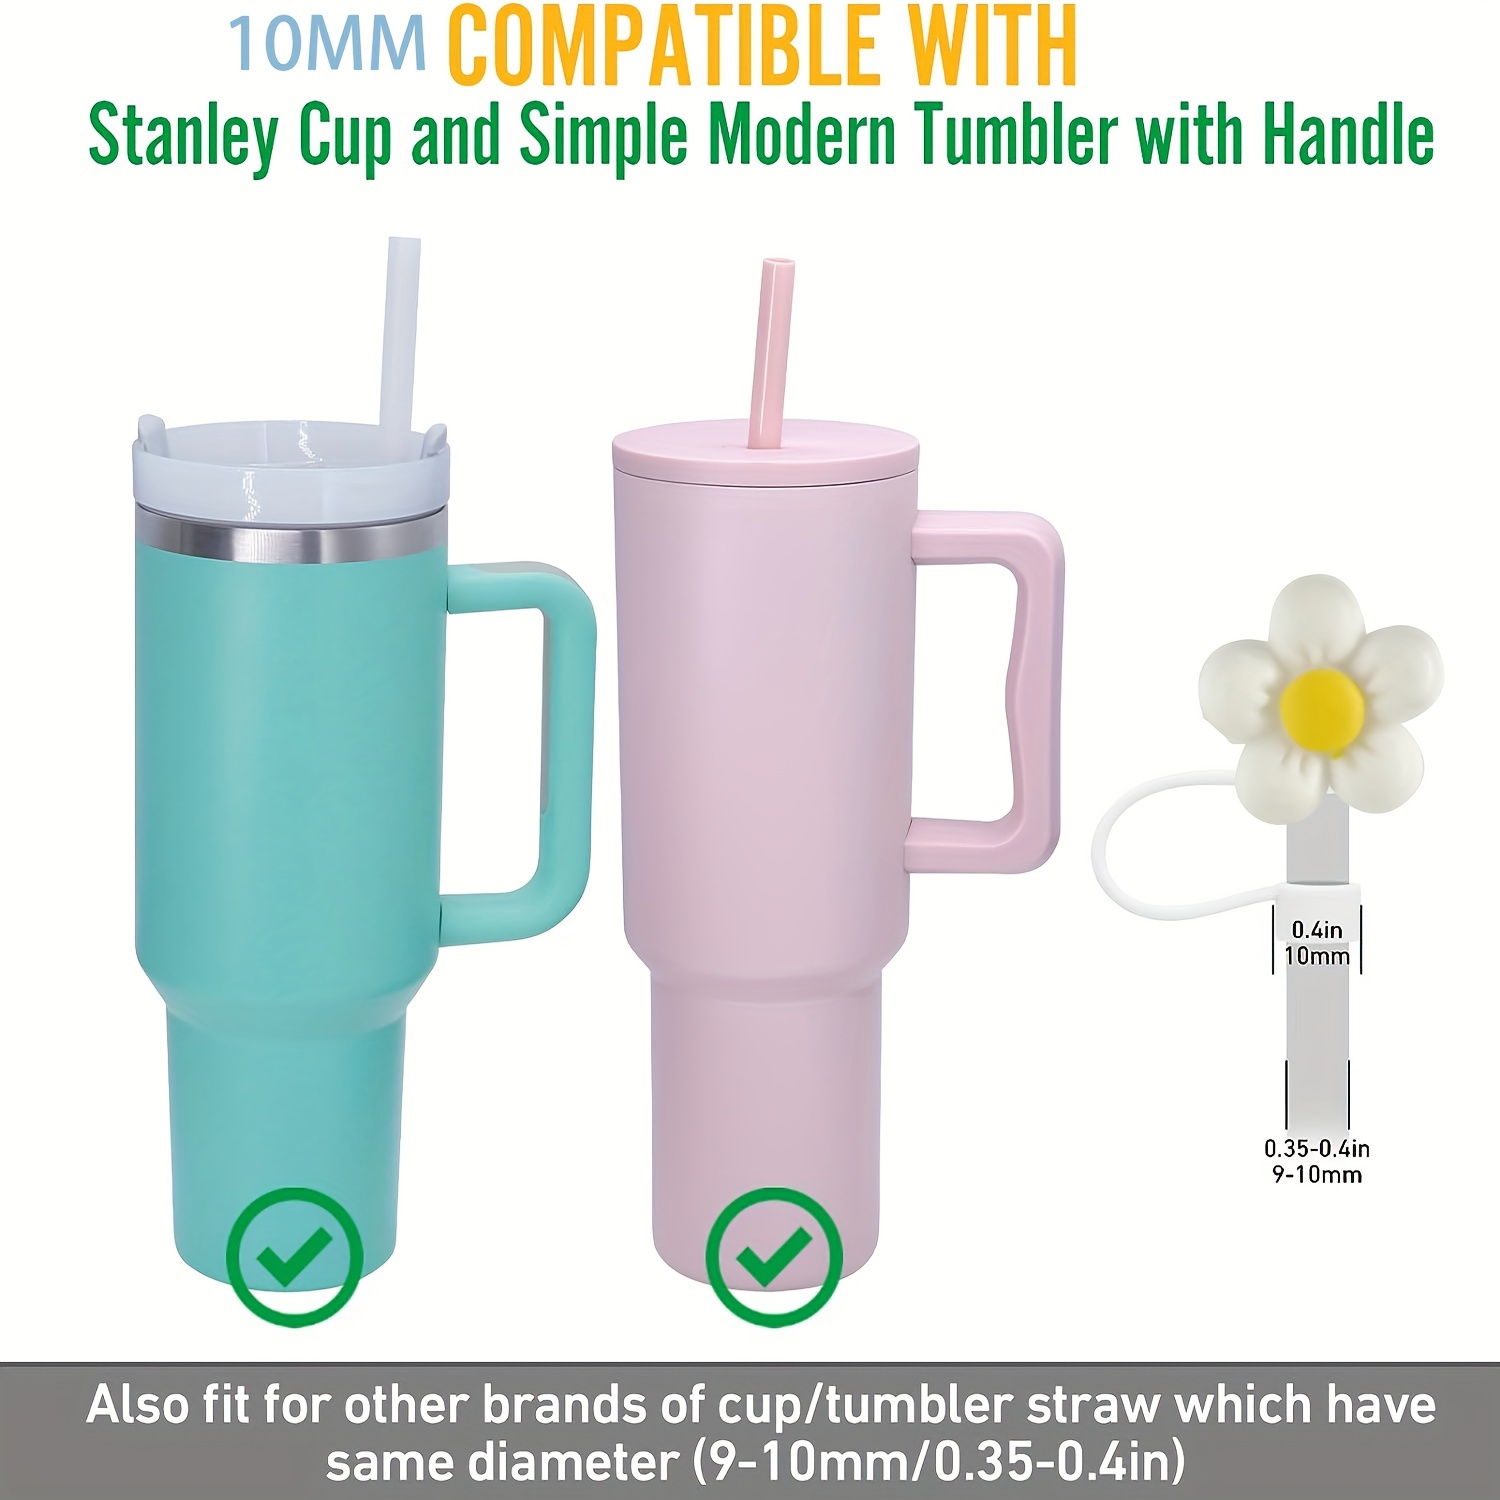 Straw Cover for Stanley Cup Tumbler-Cloud Straw Tip Covers Cap,10mm  Reusable Silicone Straw Plugs Protector,Straw Toppers for Tumblers for  Stanley Cup Accessories(7/1PCS )